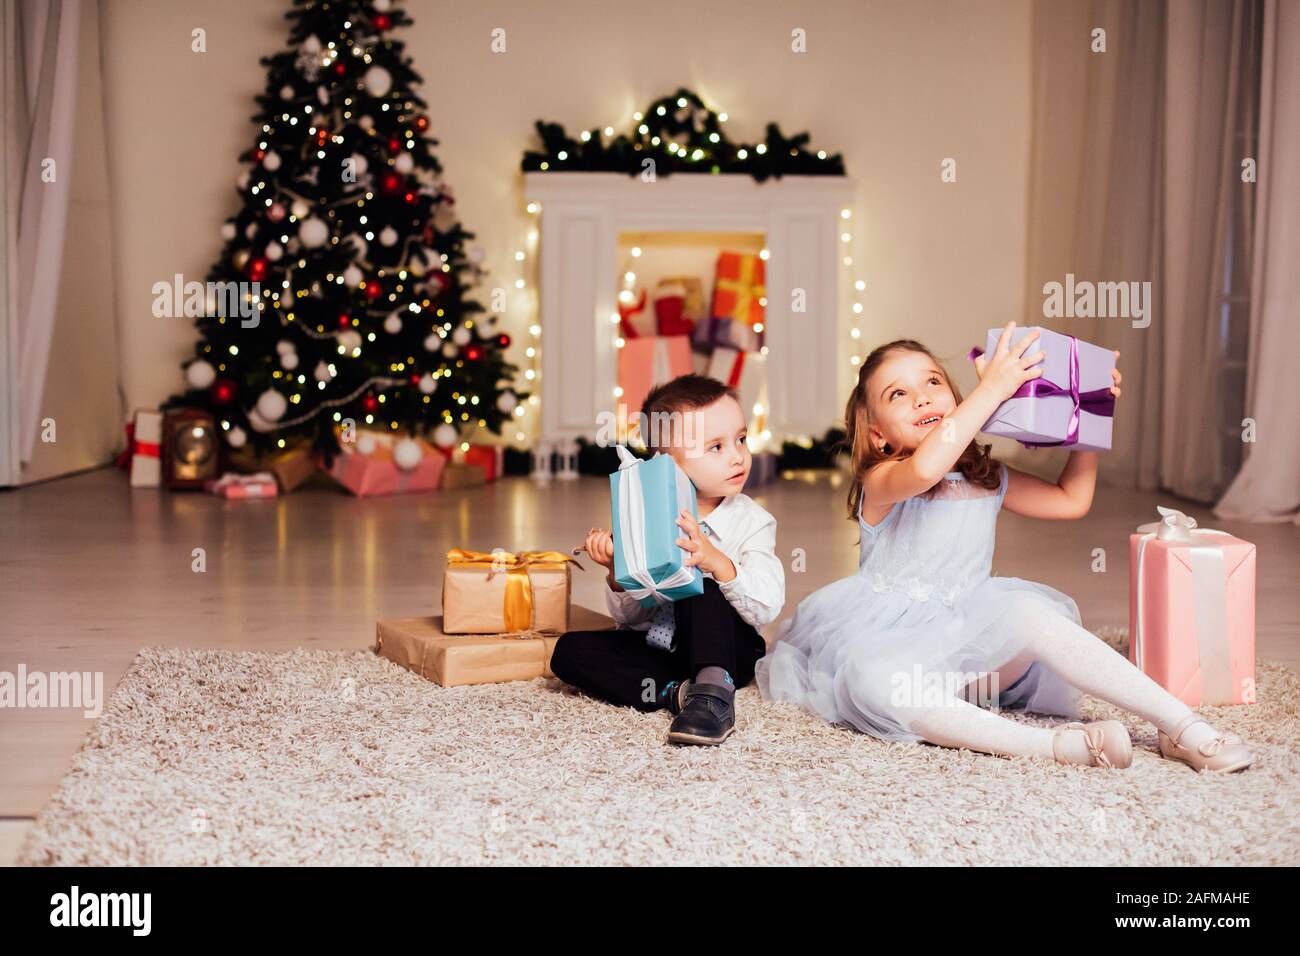 the little boy and girl open Christmas presents Christmas tree new year's Eve family celebration Stock Photo